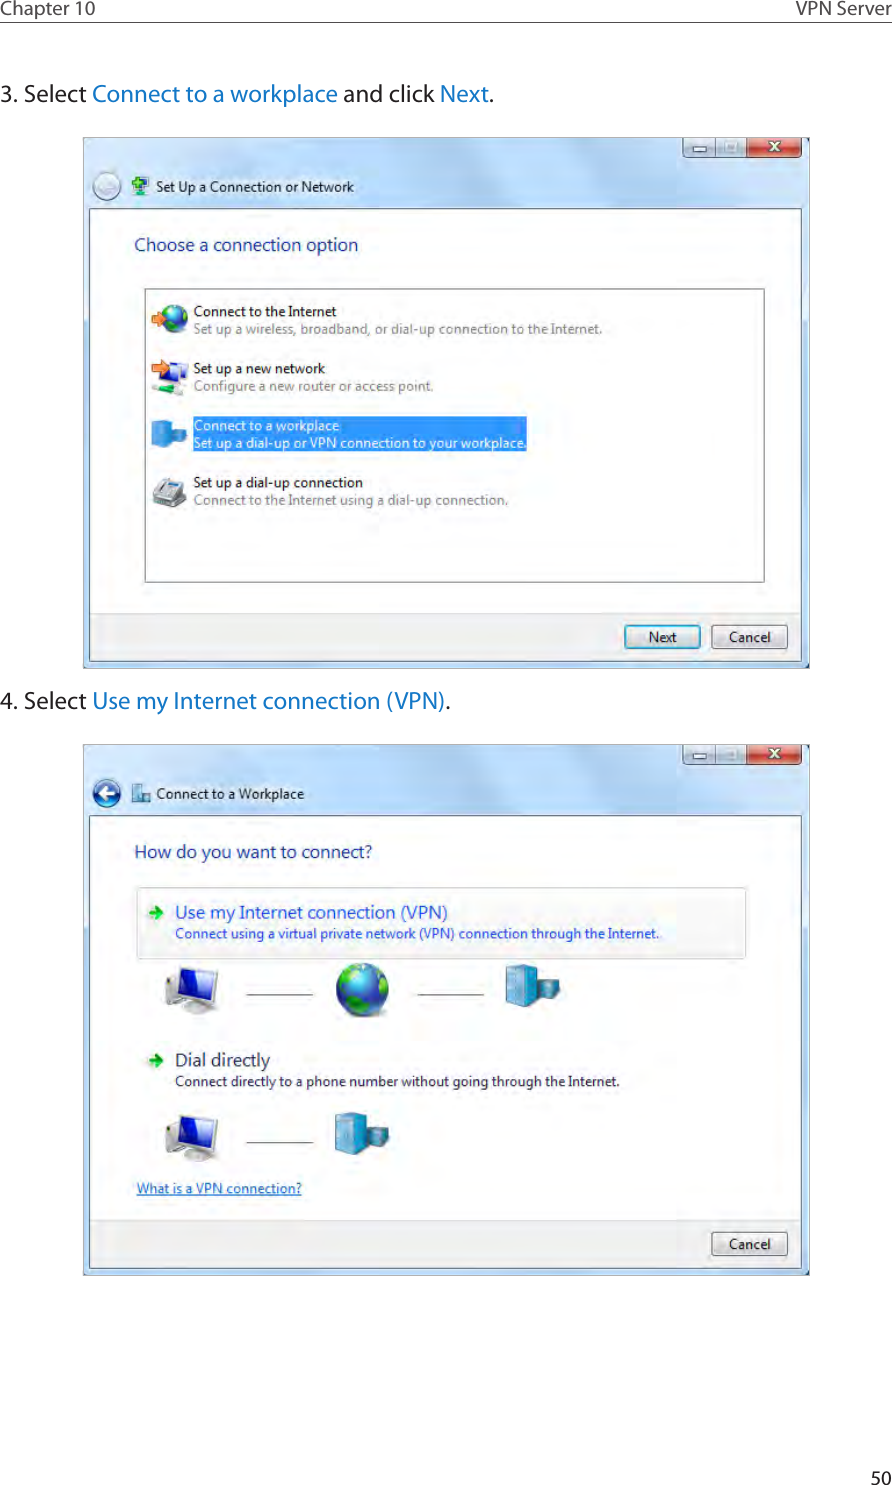 50Chapter 10 VPN Server3. Select Connect to a workplace and click Next.4. Select Use my Internet connection (VPN).